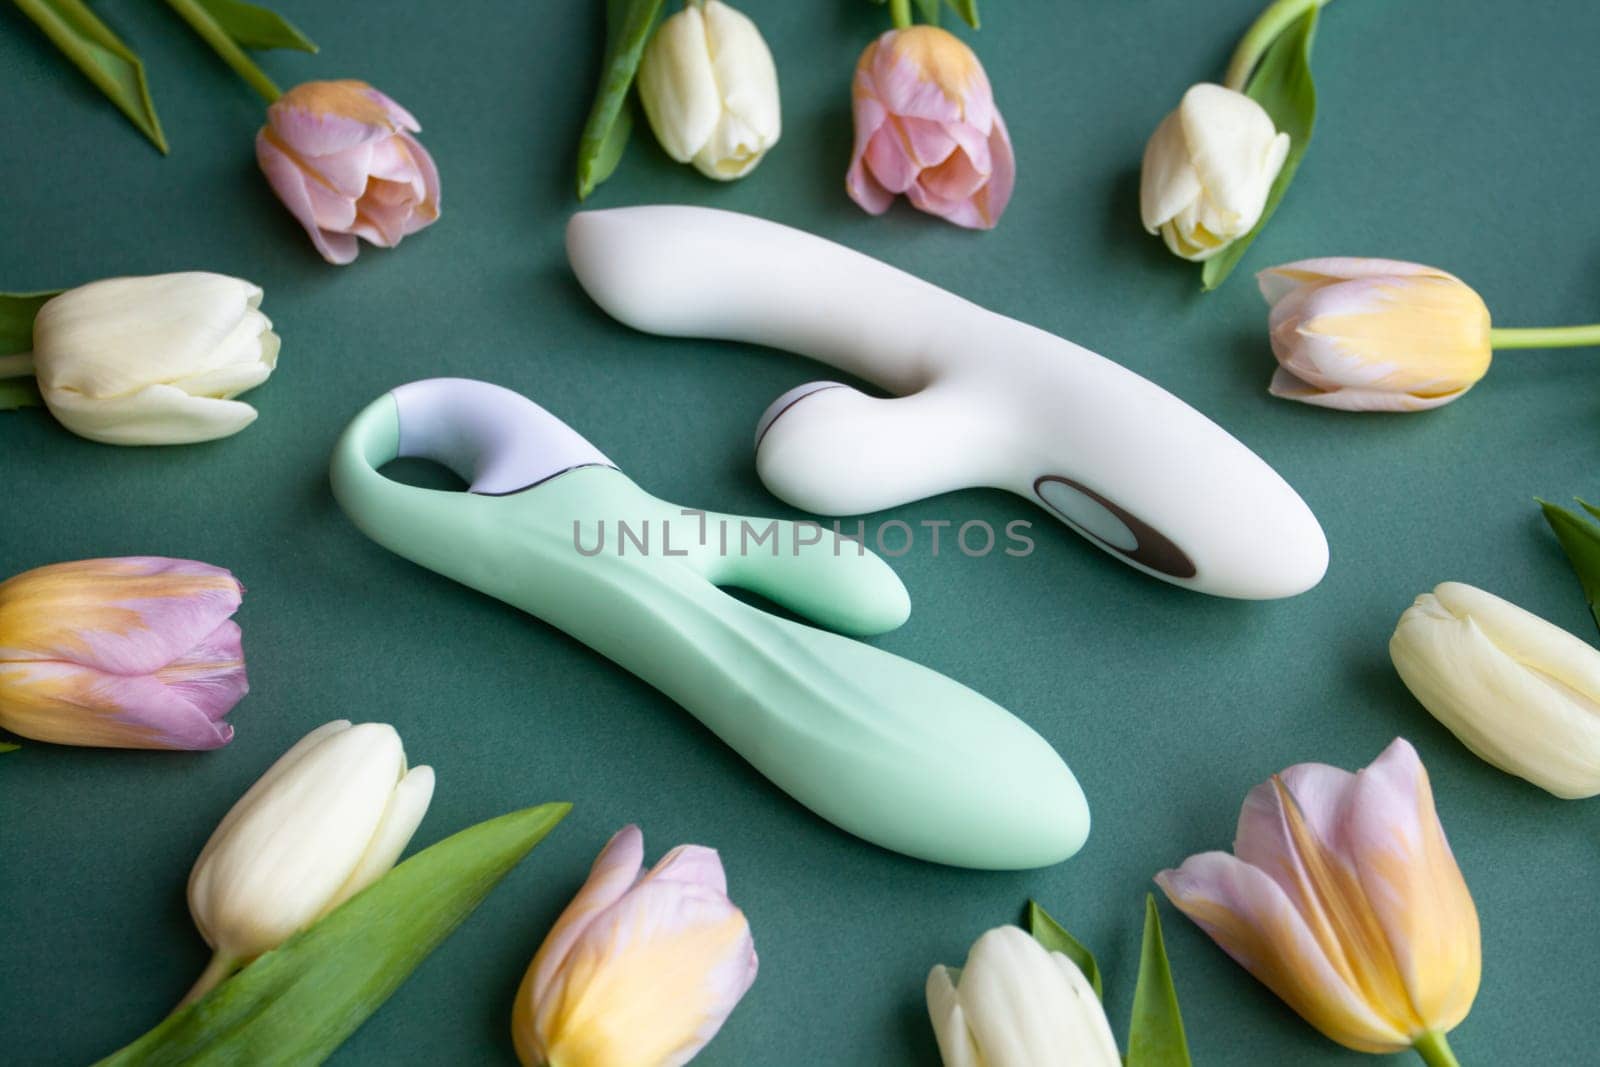 Two toys for adults lie on a green background, surrounded by tulips